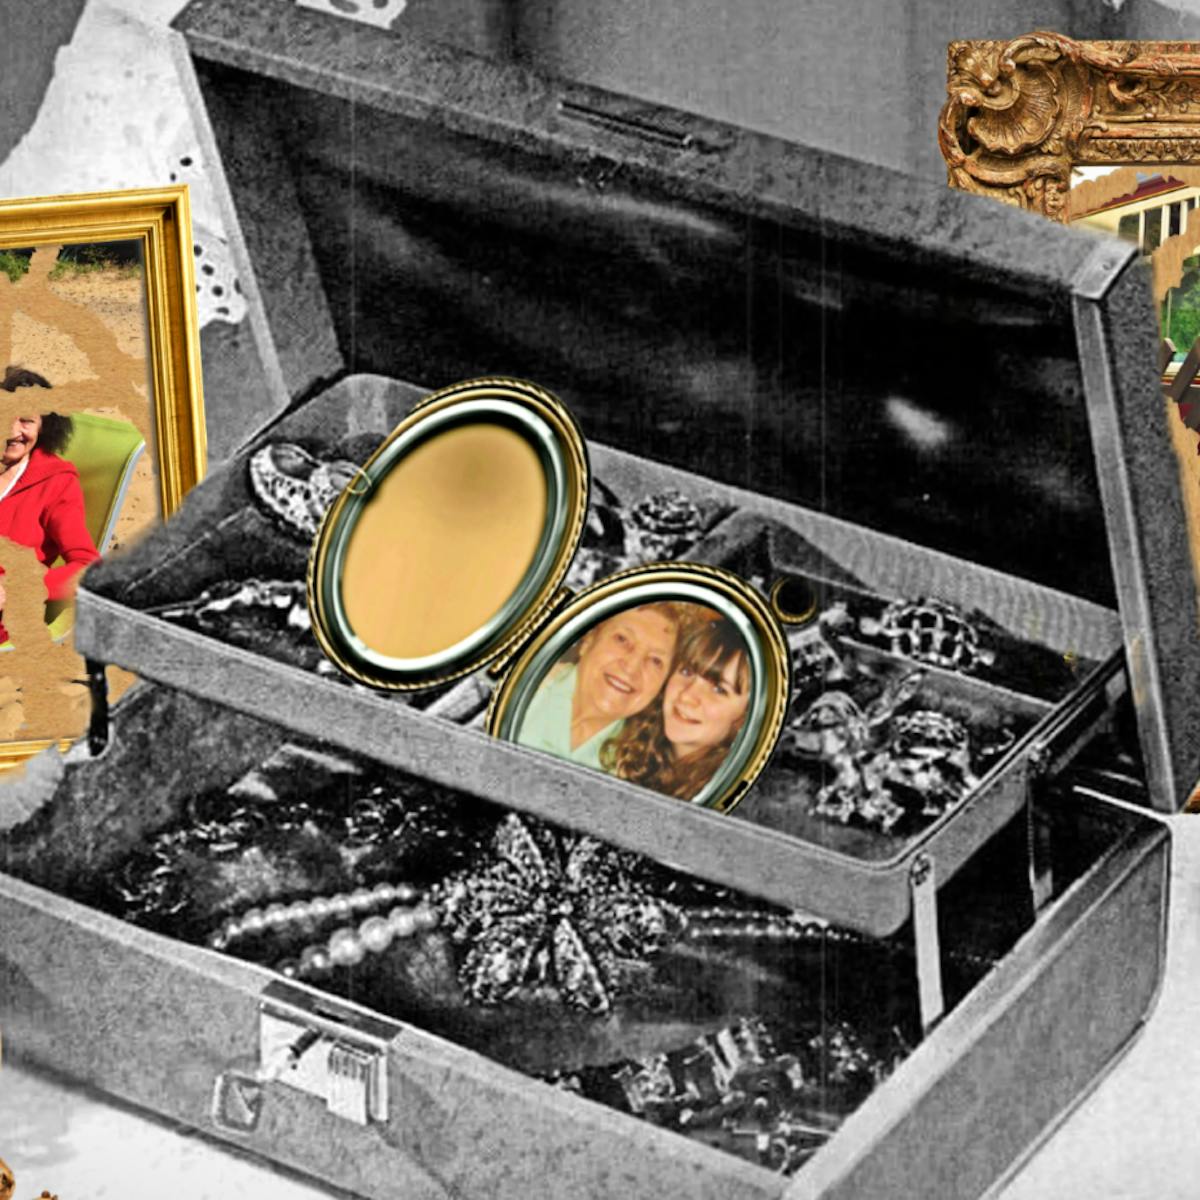 Colourful digital collage showing a black and white, two layer jewellery box stood open on a dresser with various jewels and pearls inside. On the top layer is an open locket necklace with a photo of an elderly woman and a younger woman smiling at the camera together. In front of the jewellery box is an open golden pocket watch, with the clock face blurred and distorted. There are two photos in ornate gold frames to the left and right of the central jewellery box. Each of the photos have large bits missing from them, and there are traces of missing photo in the shape of ripped up paper. The photo on the left shows an elderly woman and younger woman sat together smiling on deck chairs on a sandy beach. The photo on the right shows an elderly woman sitting down on a train platform whilst a younger woman hugs her from behind and smiles. There is a perfume bottle in front of the photo frame.  